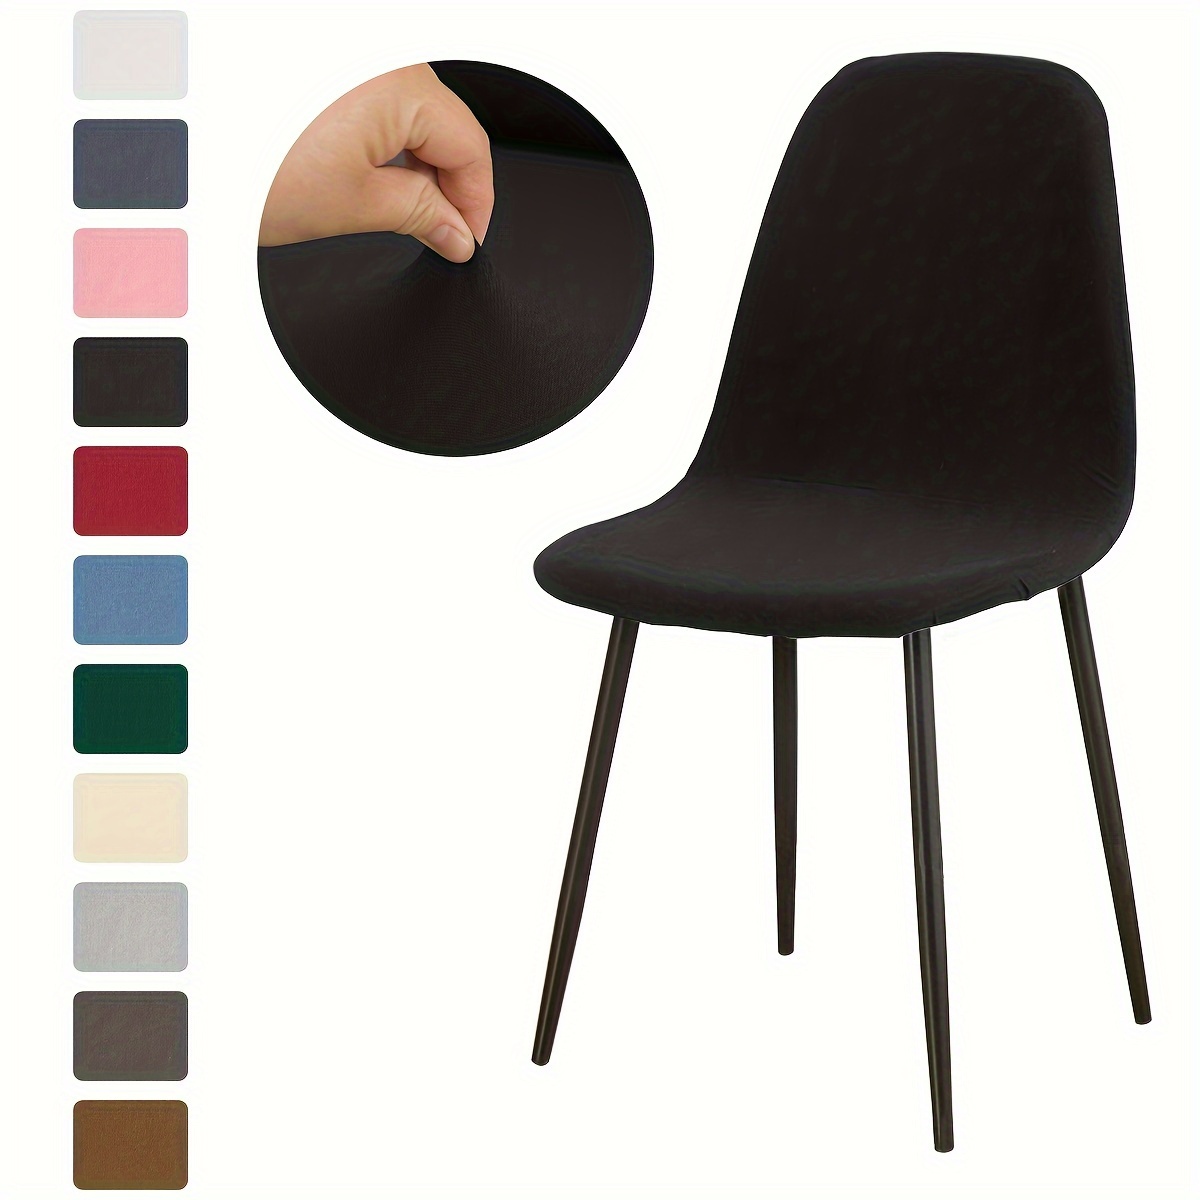 

4/6pcs Solid Color Chair Slipcovers, Dining Chair Cover, Furniture Protective Cover, For Dining Room Living Room Office Home Decor